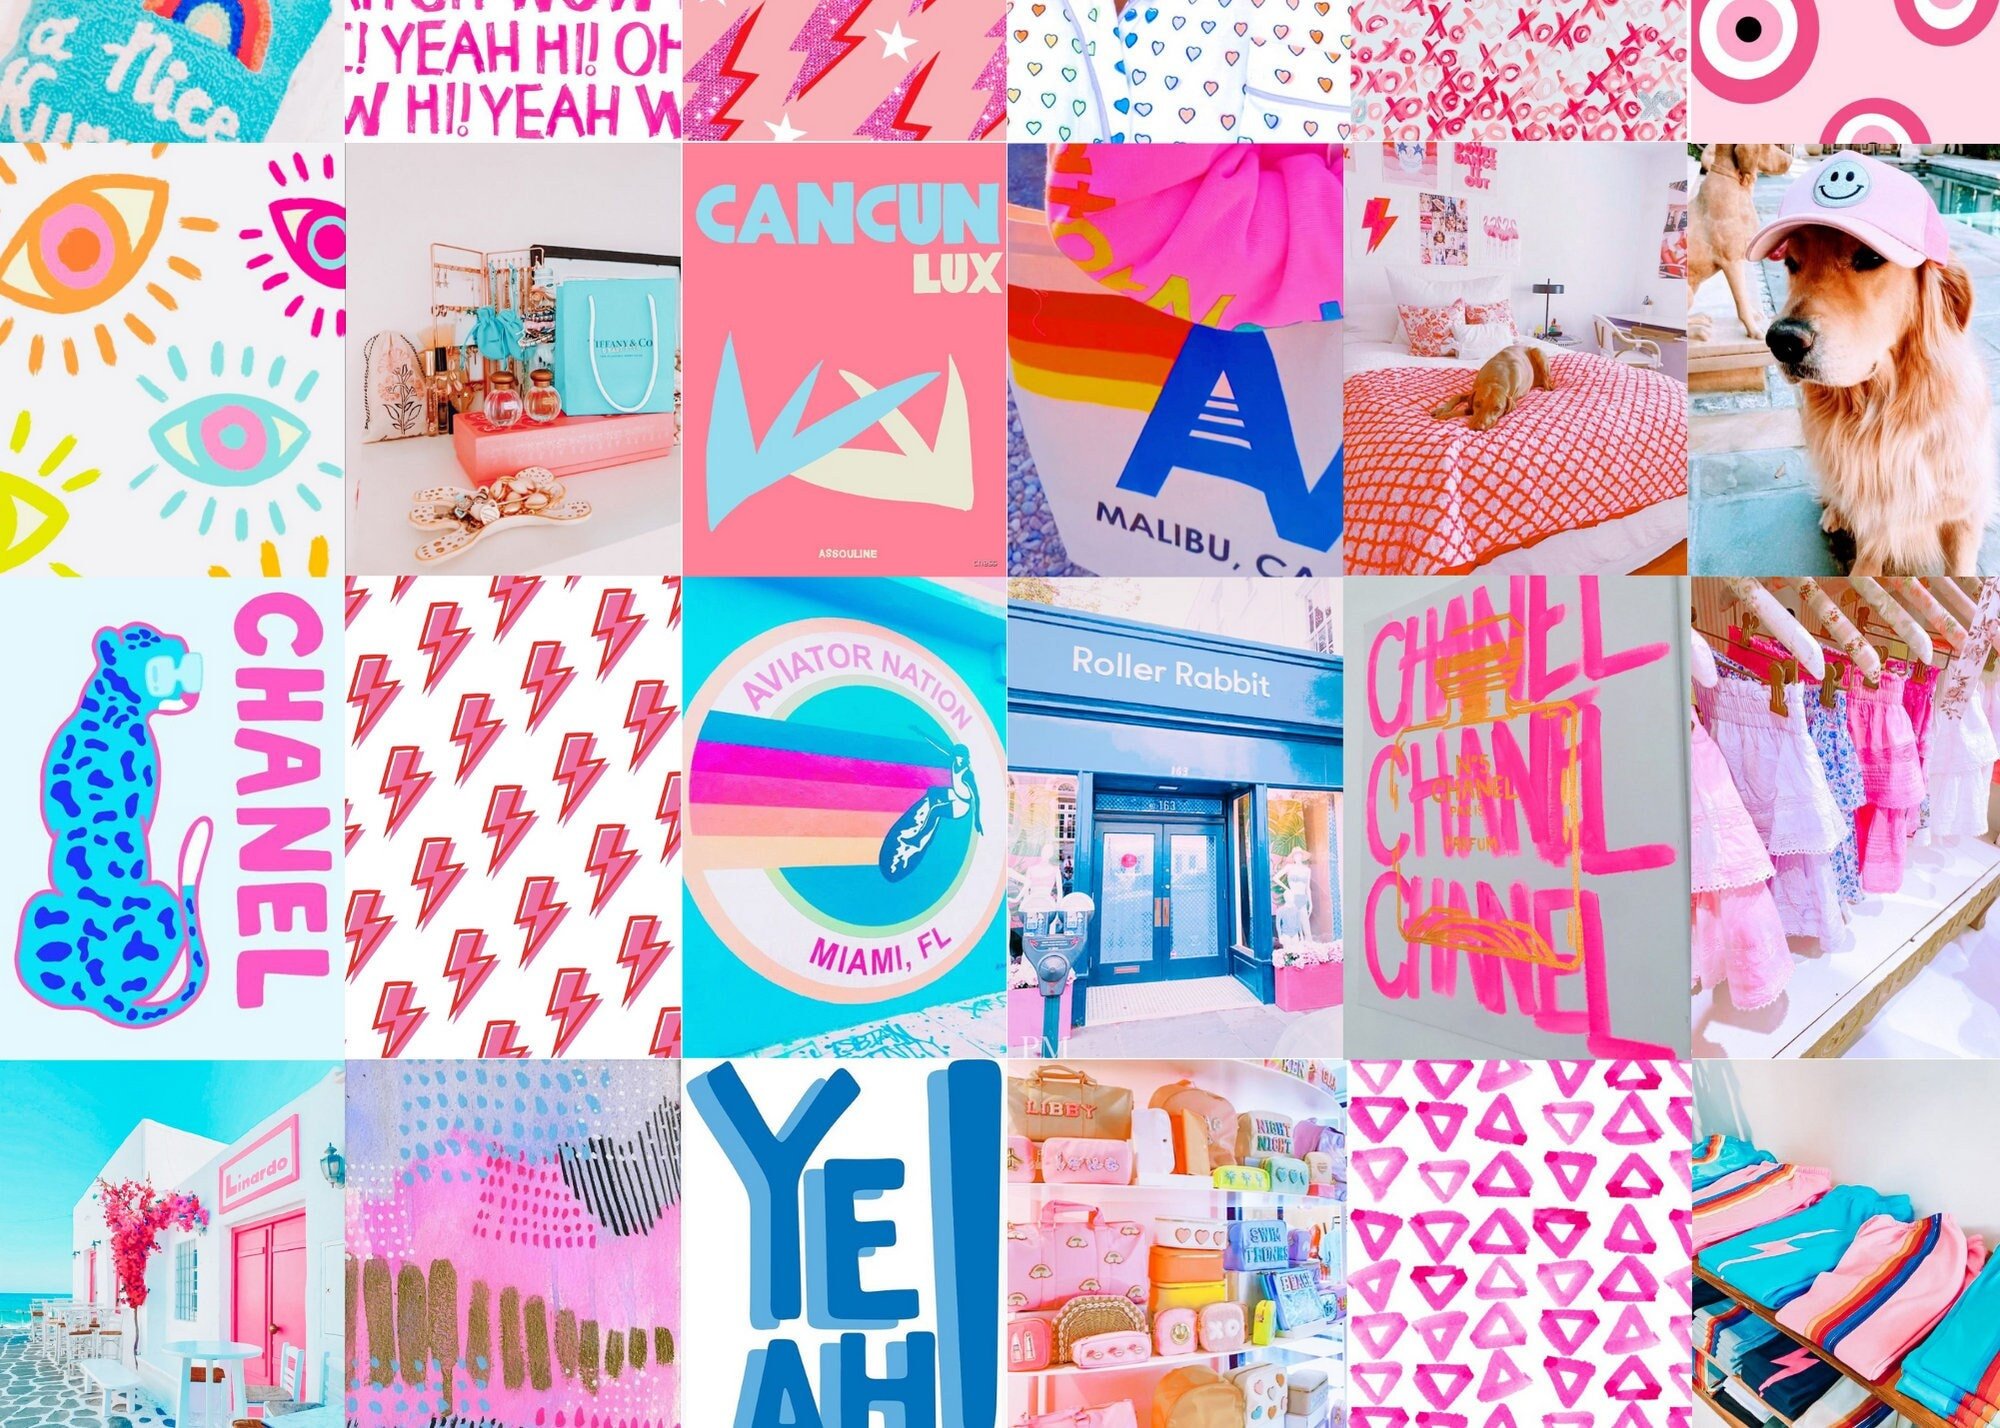 Check out HE4RTSxMADS's Shuffles Preppy wallpaper if ur name starts with H  wich letter next!